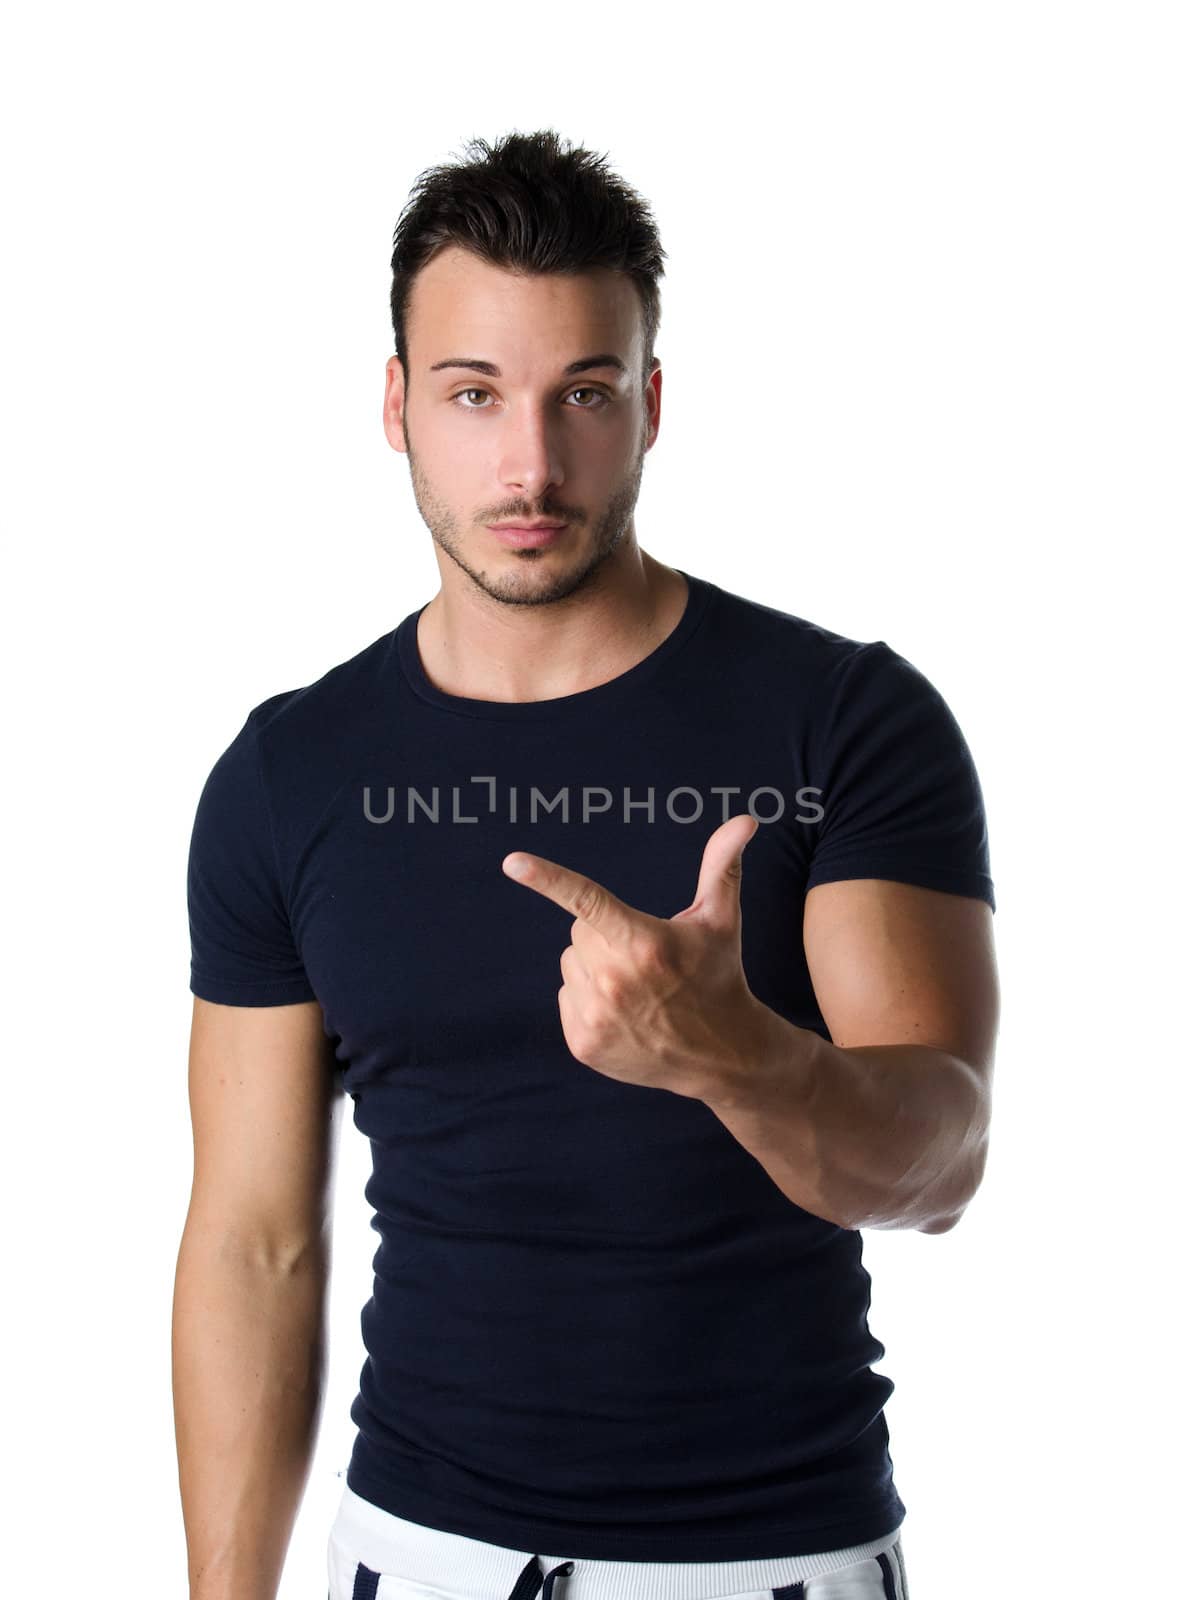 Attractive young man counting to two with fingers and hands, isolated on white background